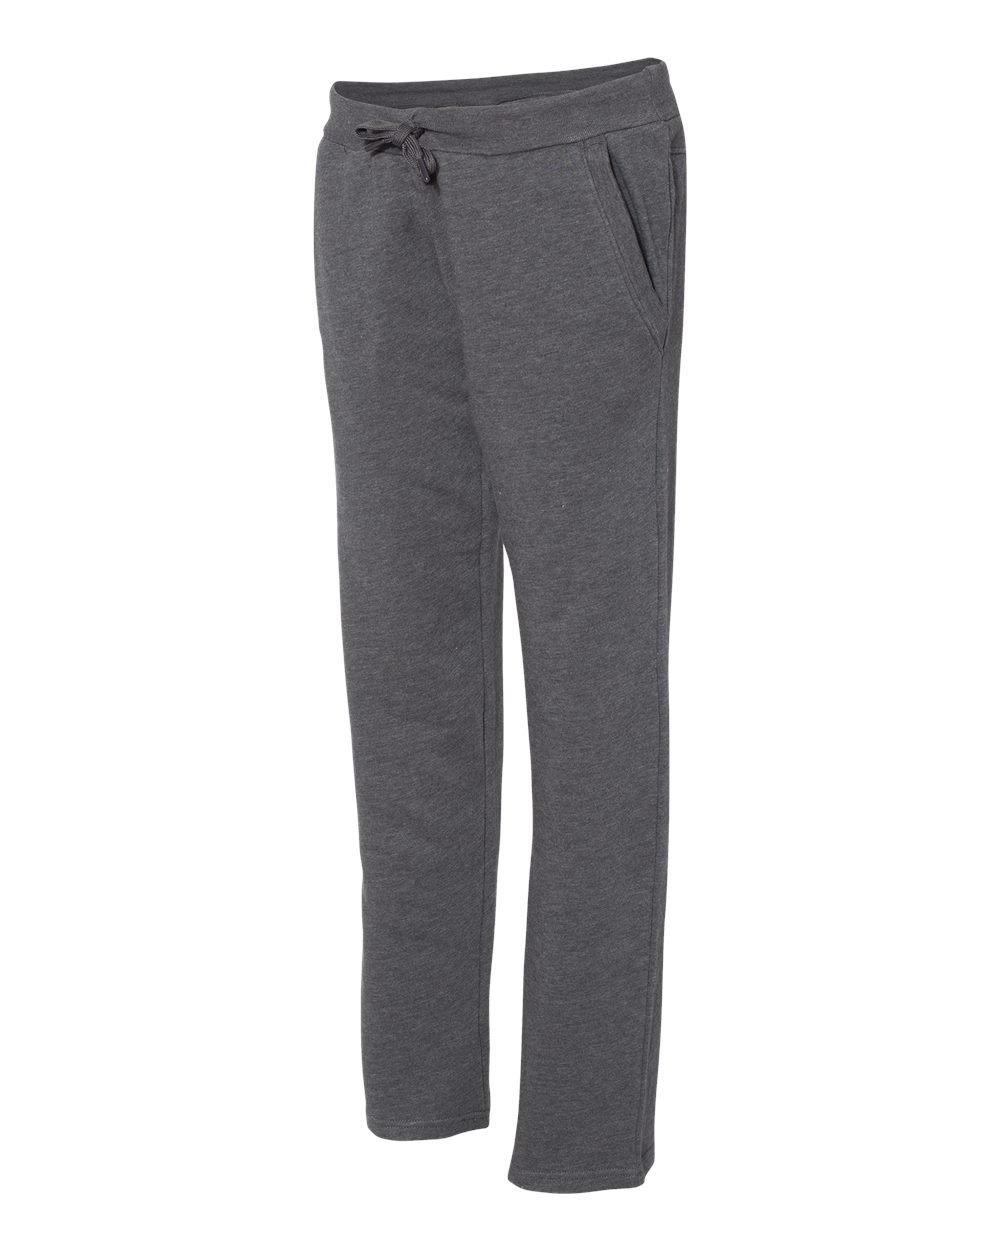 Russell Athletic B61311513 Womens Lightweight Open Bottom Sweatpants&#44; Black Heather - Small - image 2 of 5